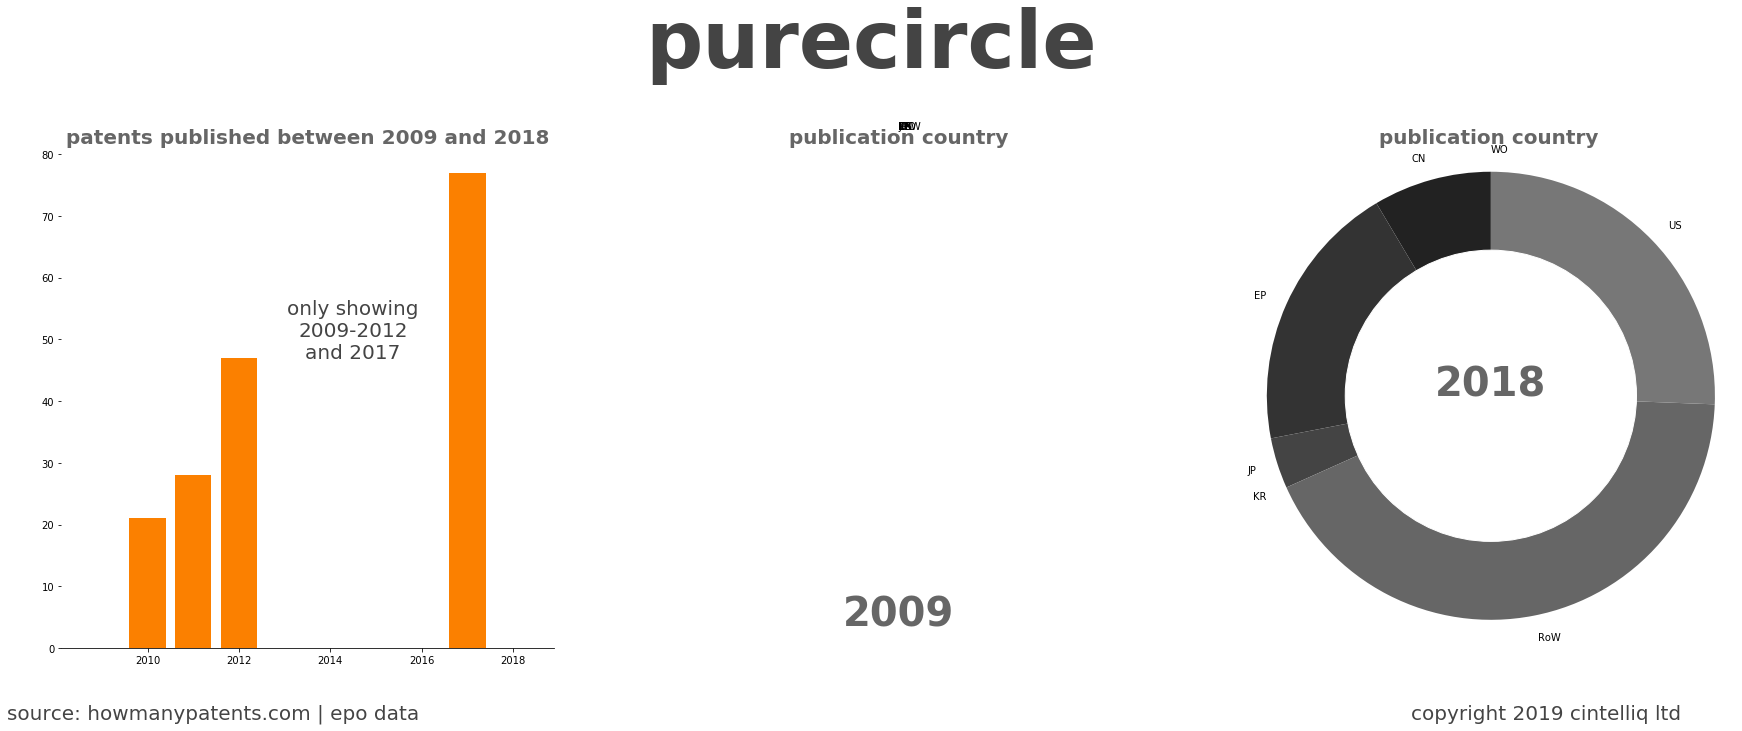 summary of patents for Purecircle